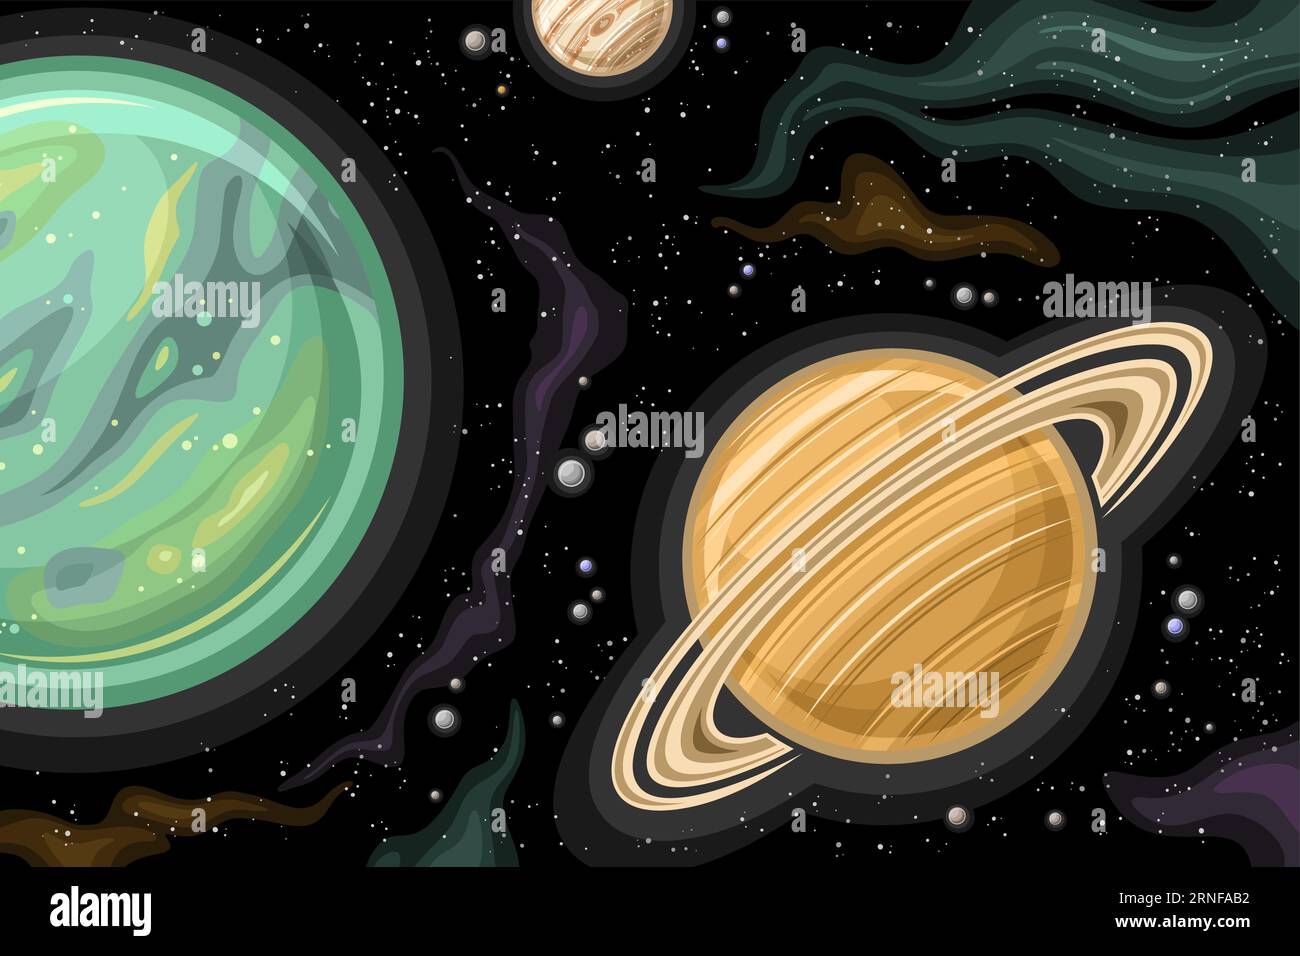 Vector Fantasy Space Chart, astronomical horizontal poster with cartoon design gas giant Saturn planet and orbiting moon Titan in deep space, decorati Stock Vector